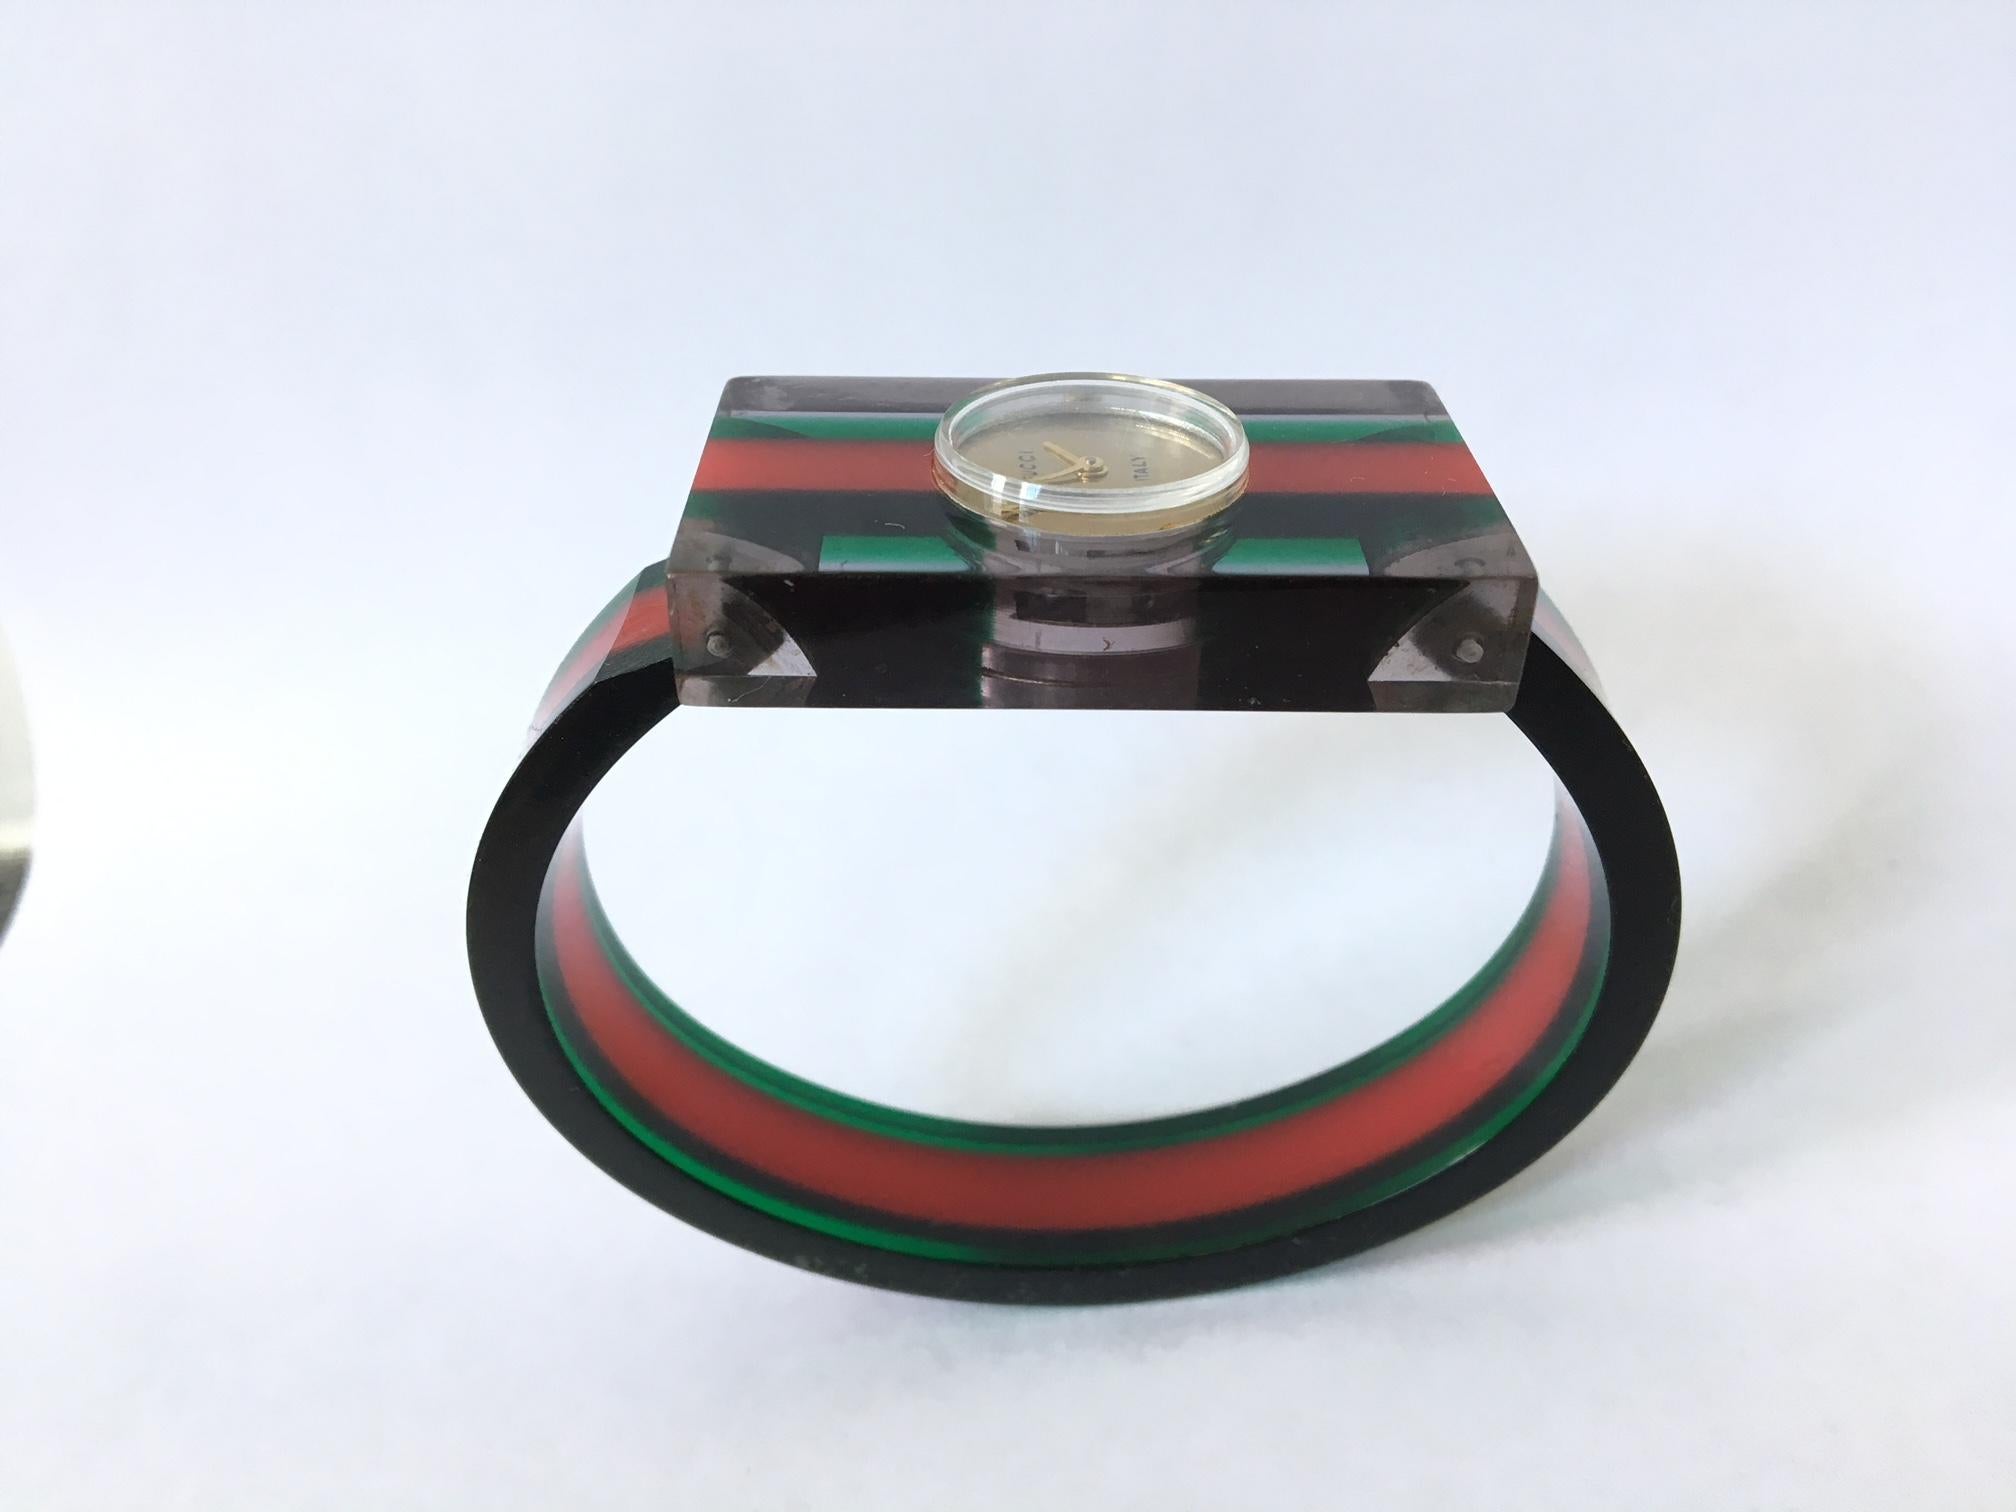 Vintage 1970s Gucci Lucite and Bakelite Bangle Watch 2